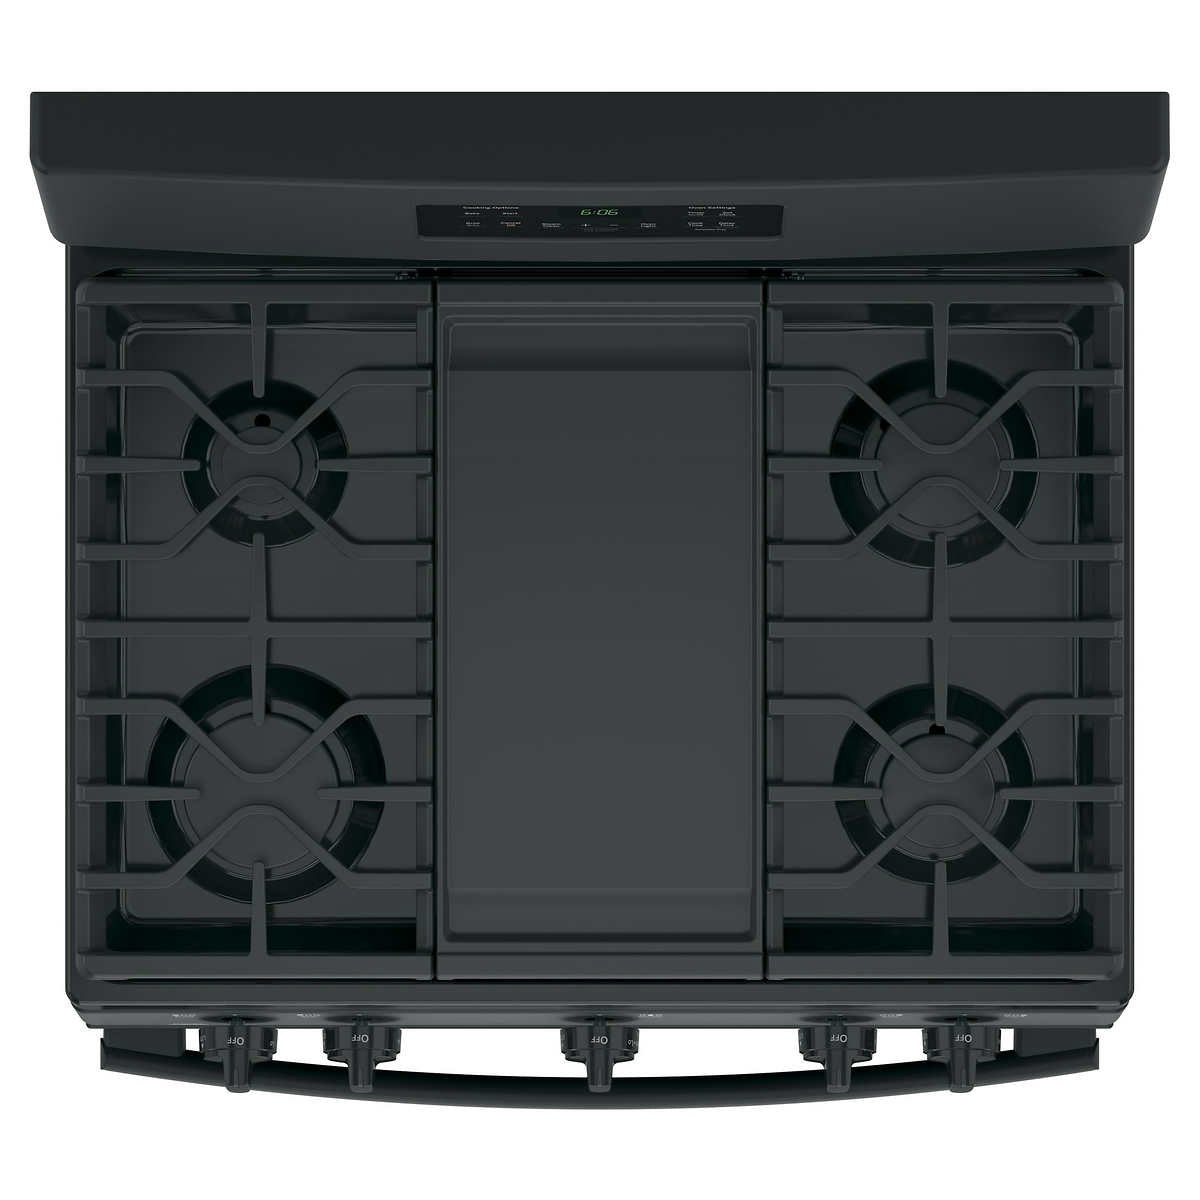 GE 5.0 cu. ft. Free-Standing GAS Range with Center Oval Burner and Flexible Broiling